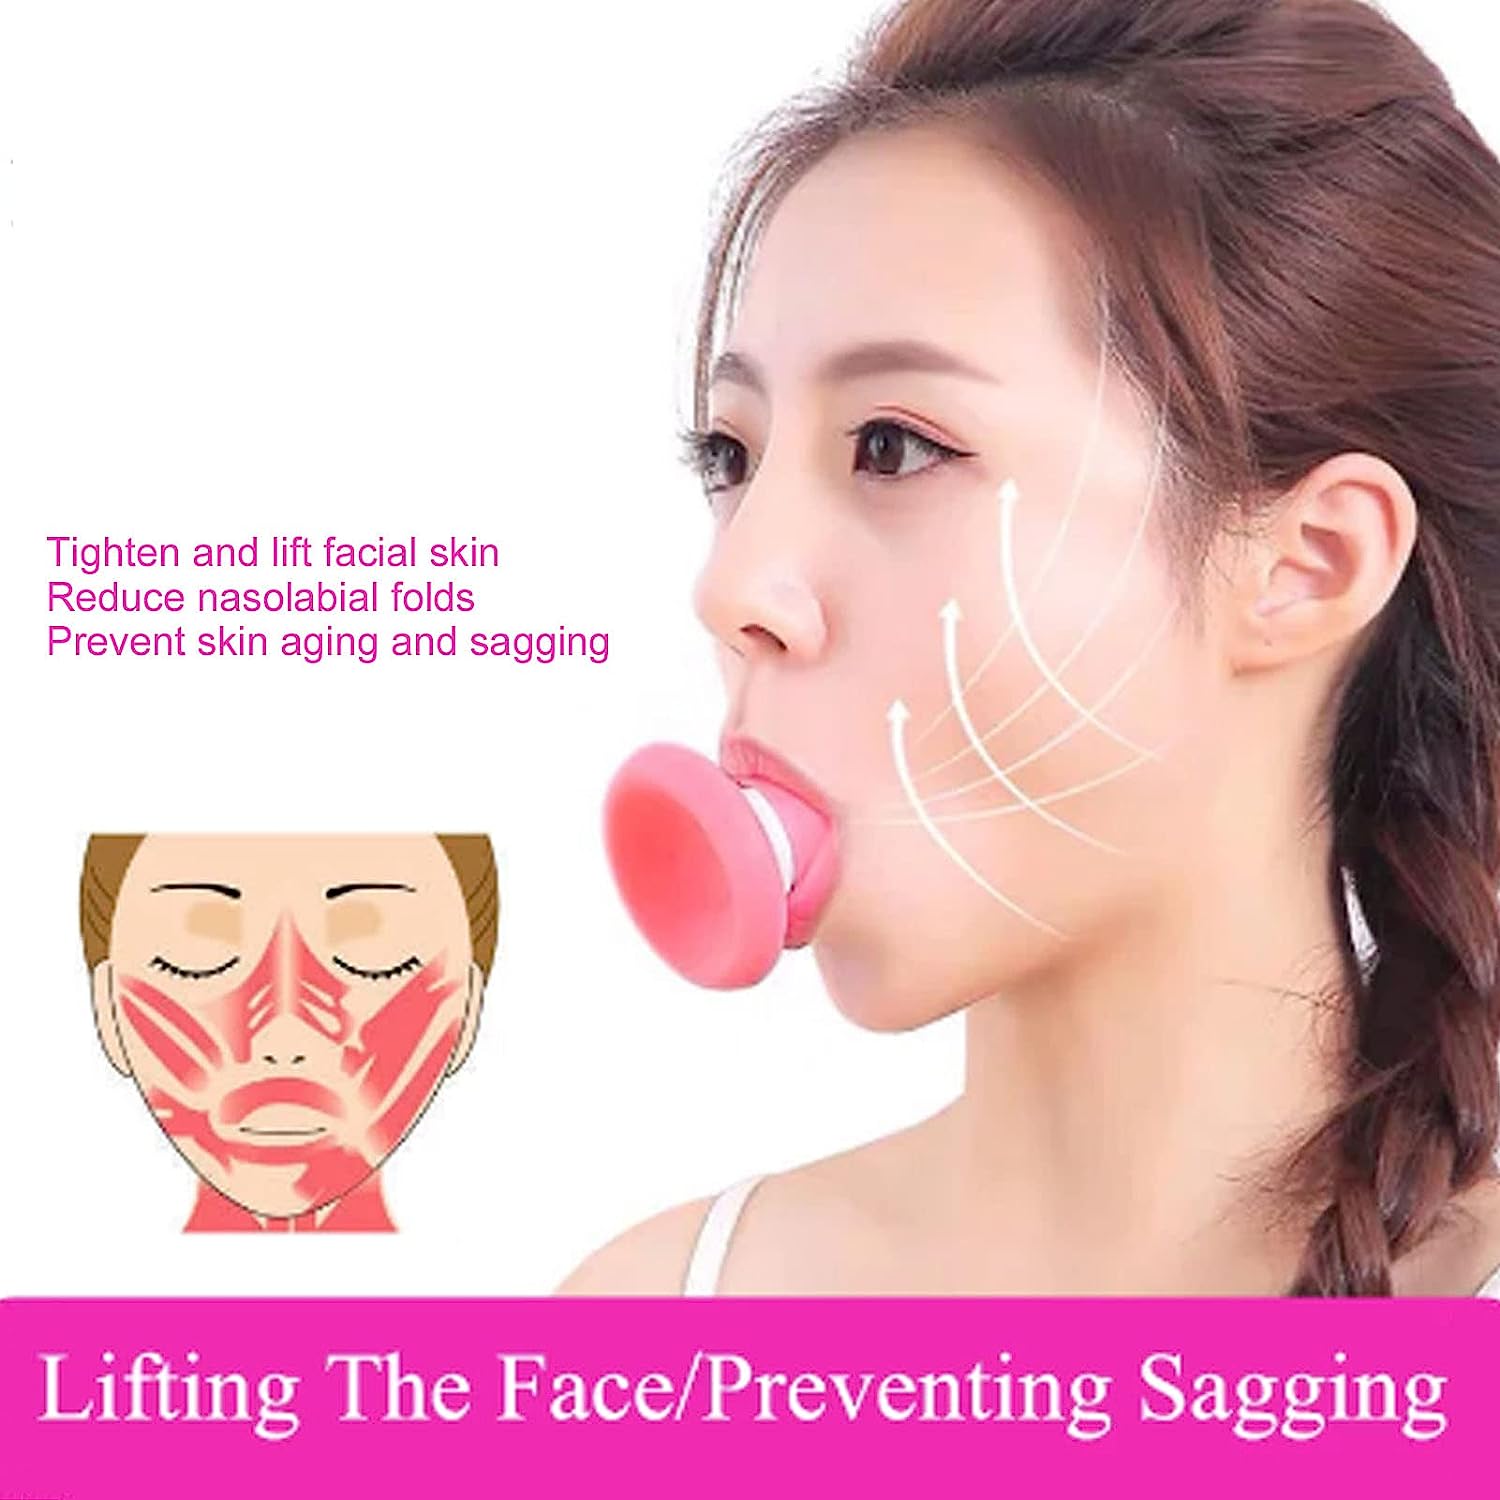 Silicone Facial Jaw Exerciser Breathing Type Face Slimmer, Breathing Type Face Slimmer Face Lift Inhaling & Exhaling Tool, Look Younger And Healthier - Helps Reduce Stress And Cravings (Card Packing)